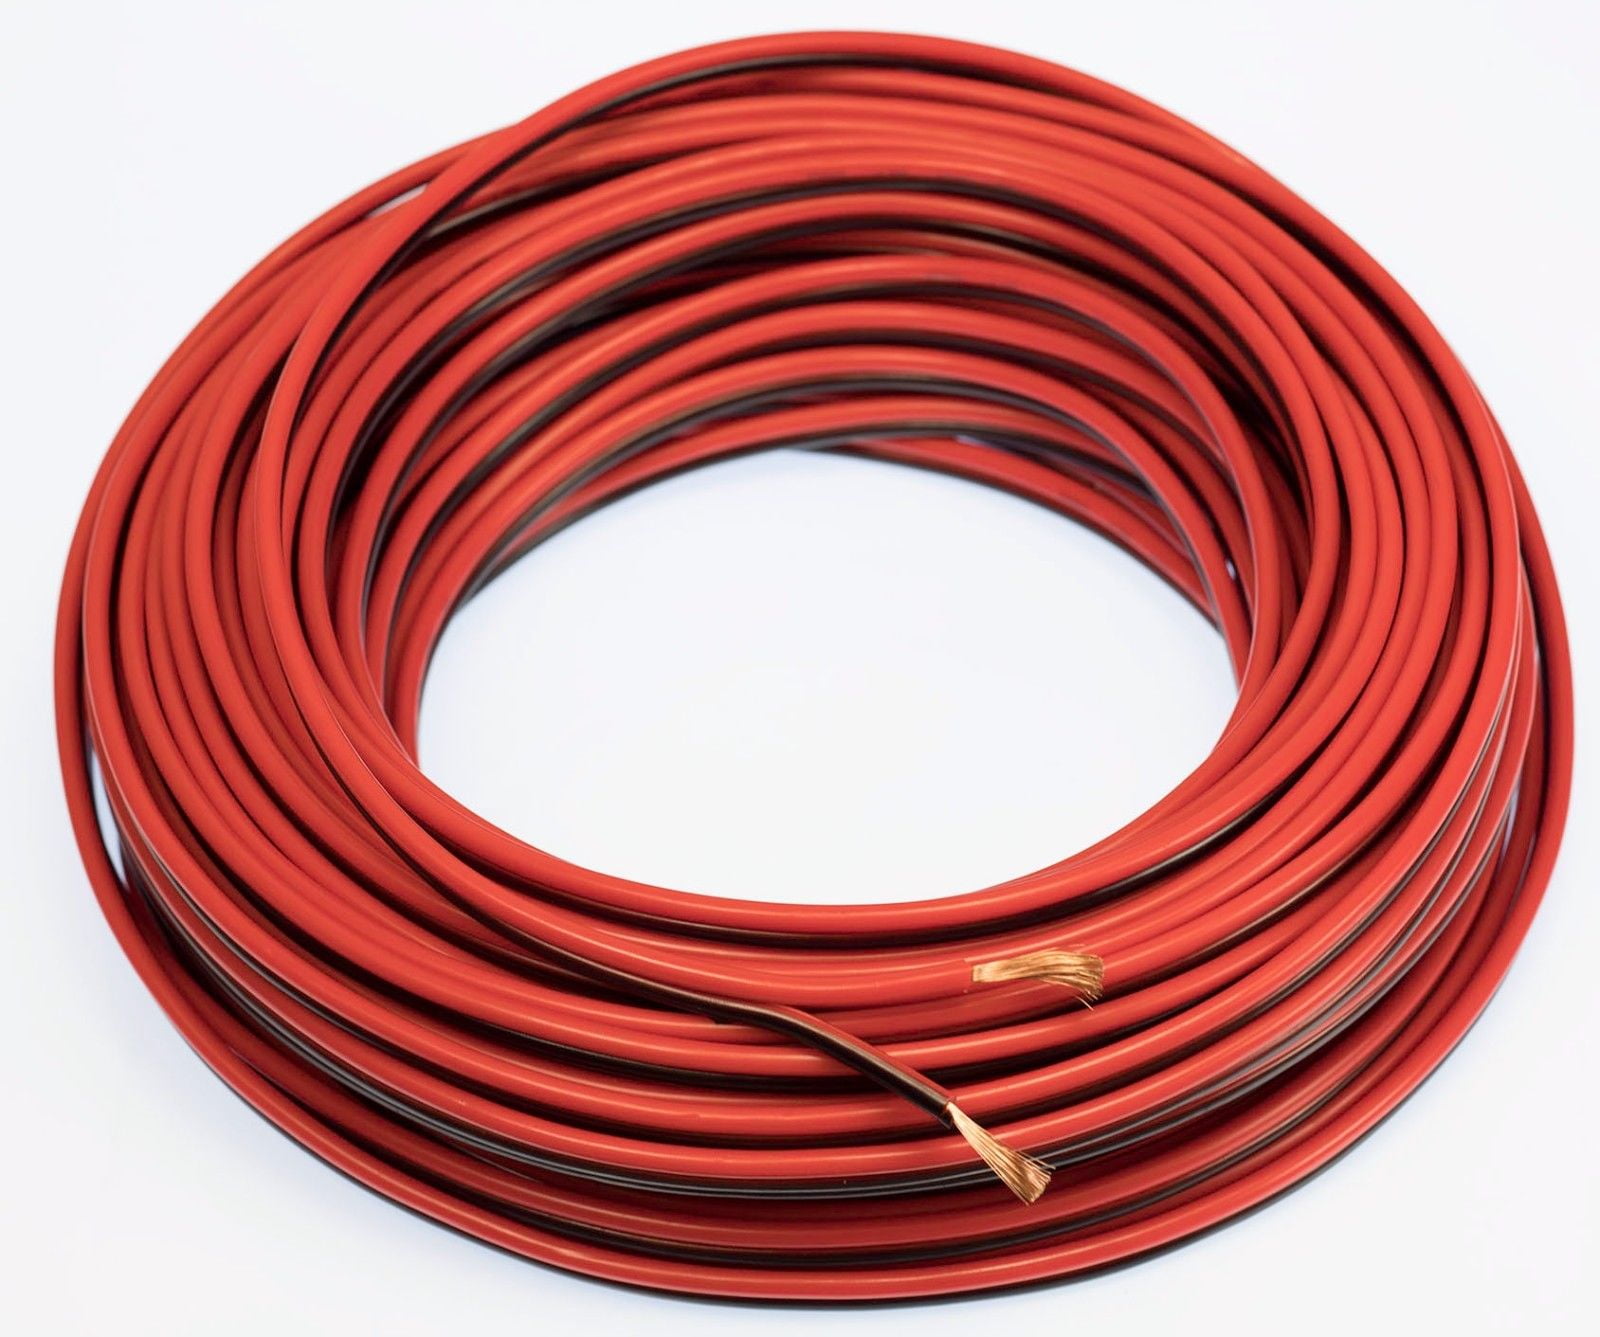 12 Gauge 30' ft SPEAKER WIRE Red Black Cable Car Audio Home Stereo 12V DC Power